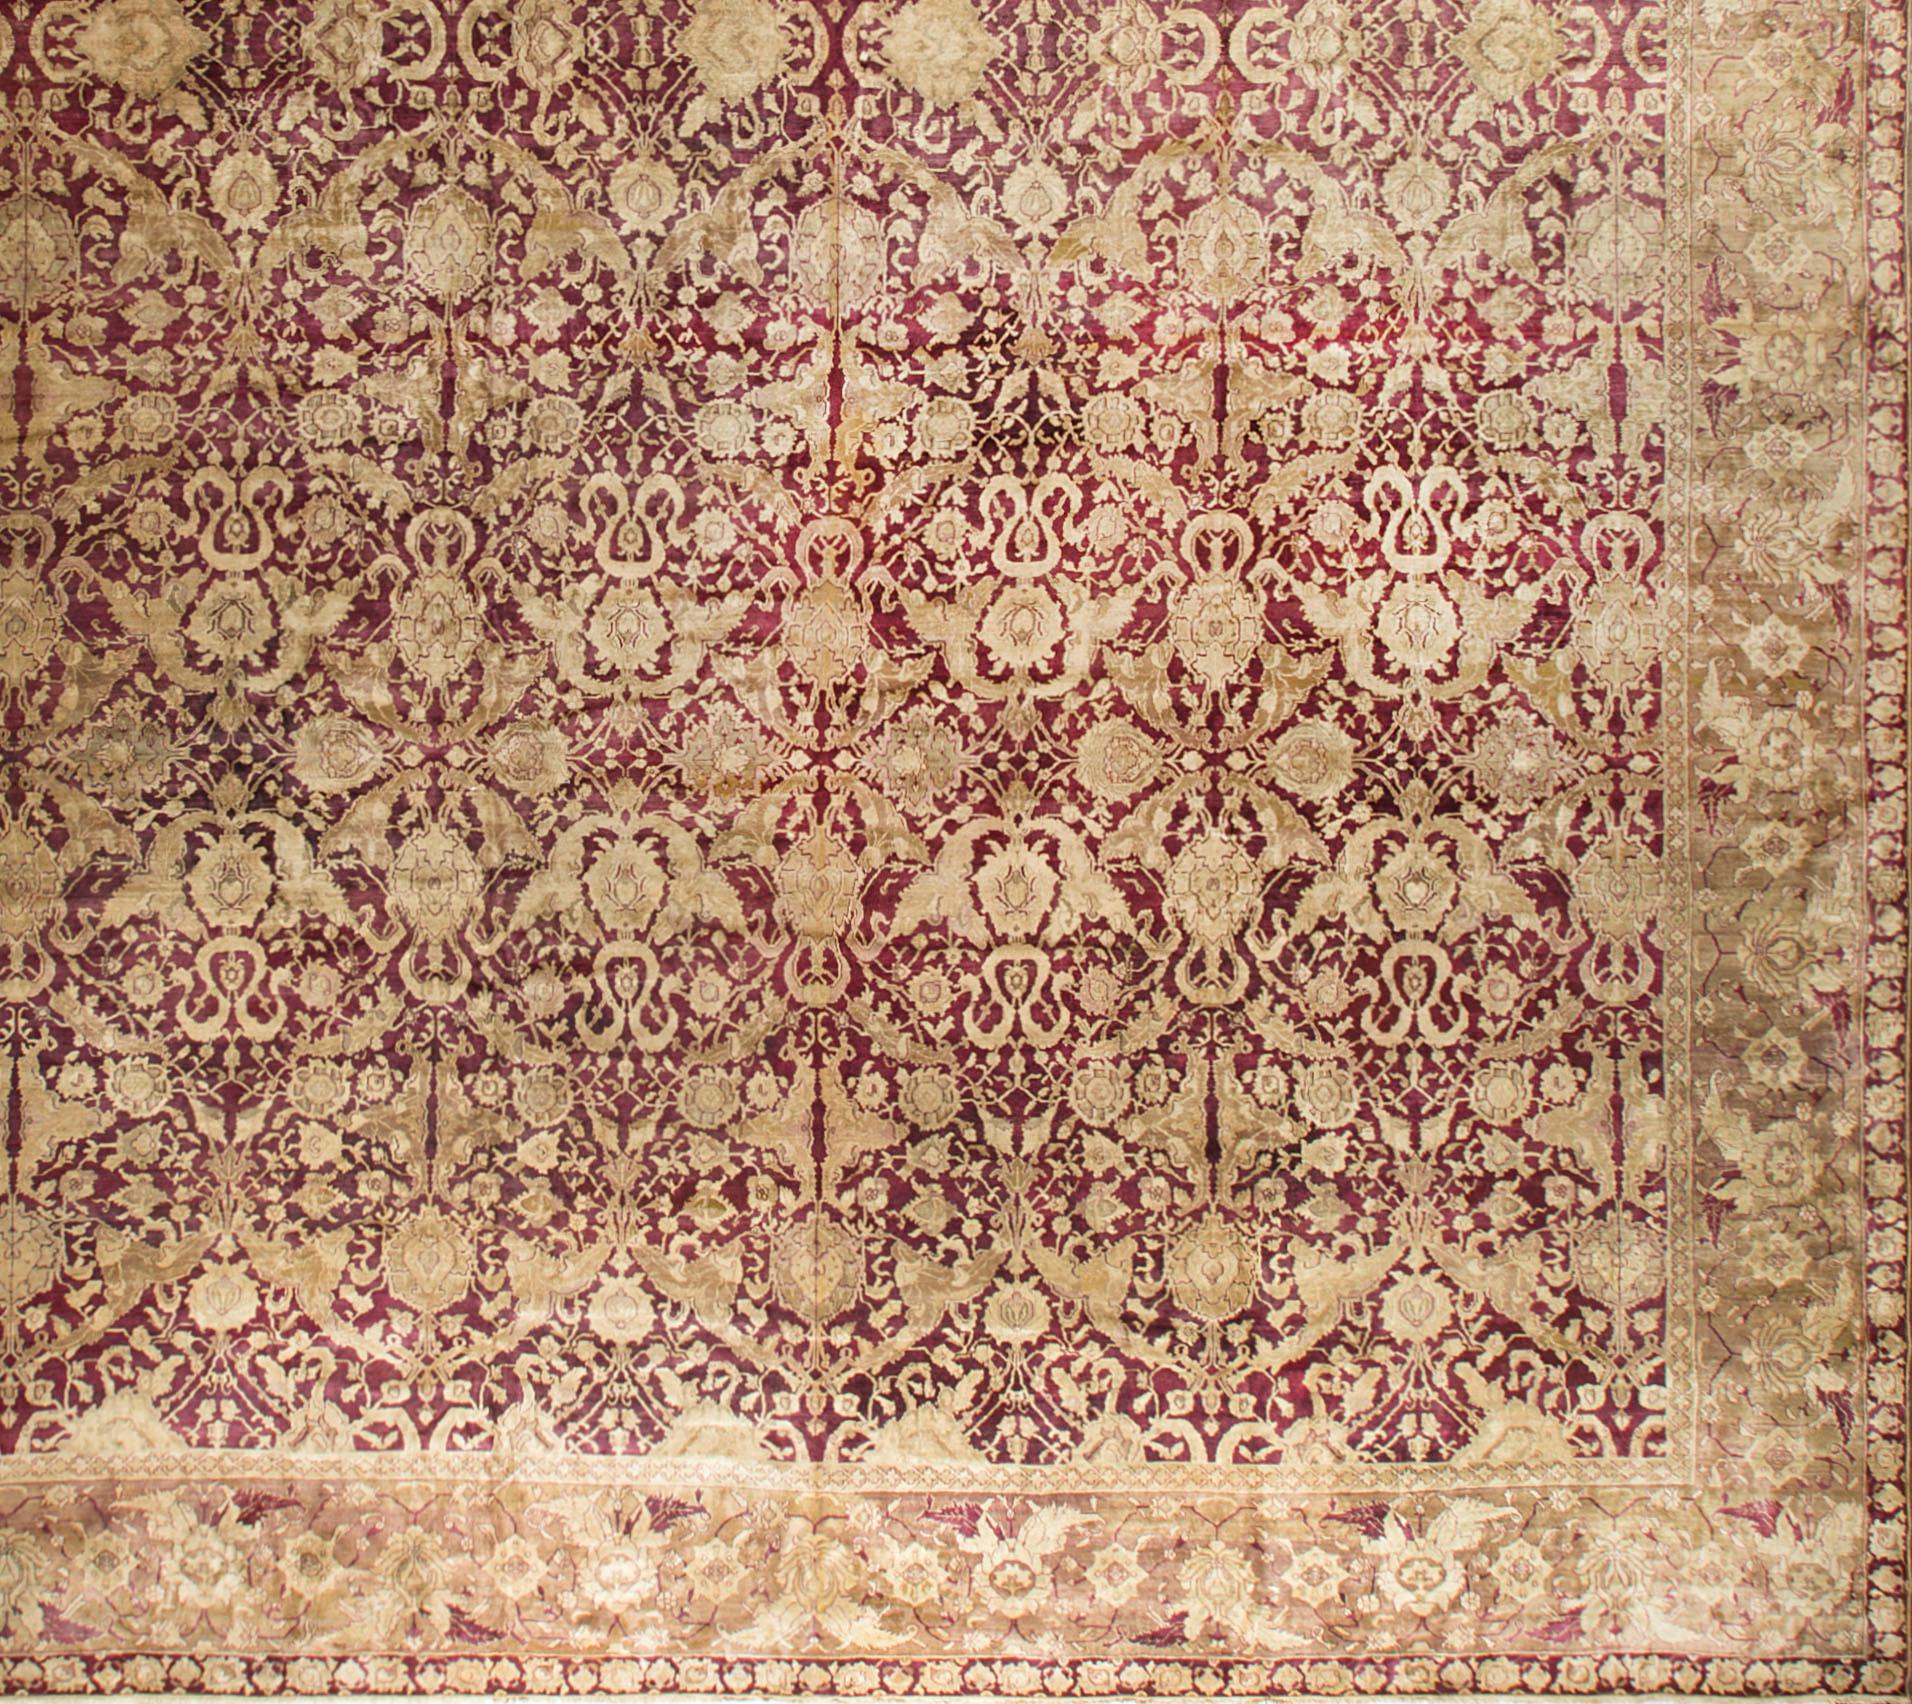 Hand-Woven Antique Indian Agra Rug, circa 1880  21'3 x 26'6 For Sale